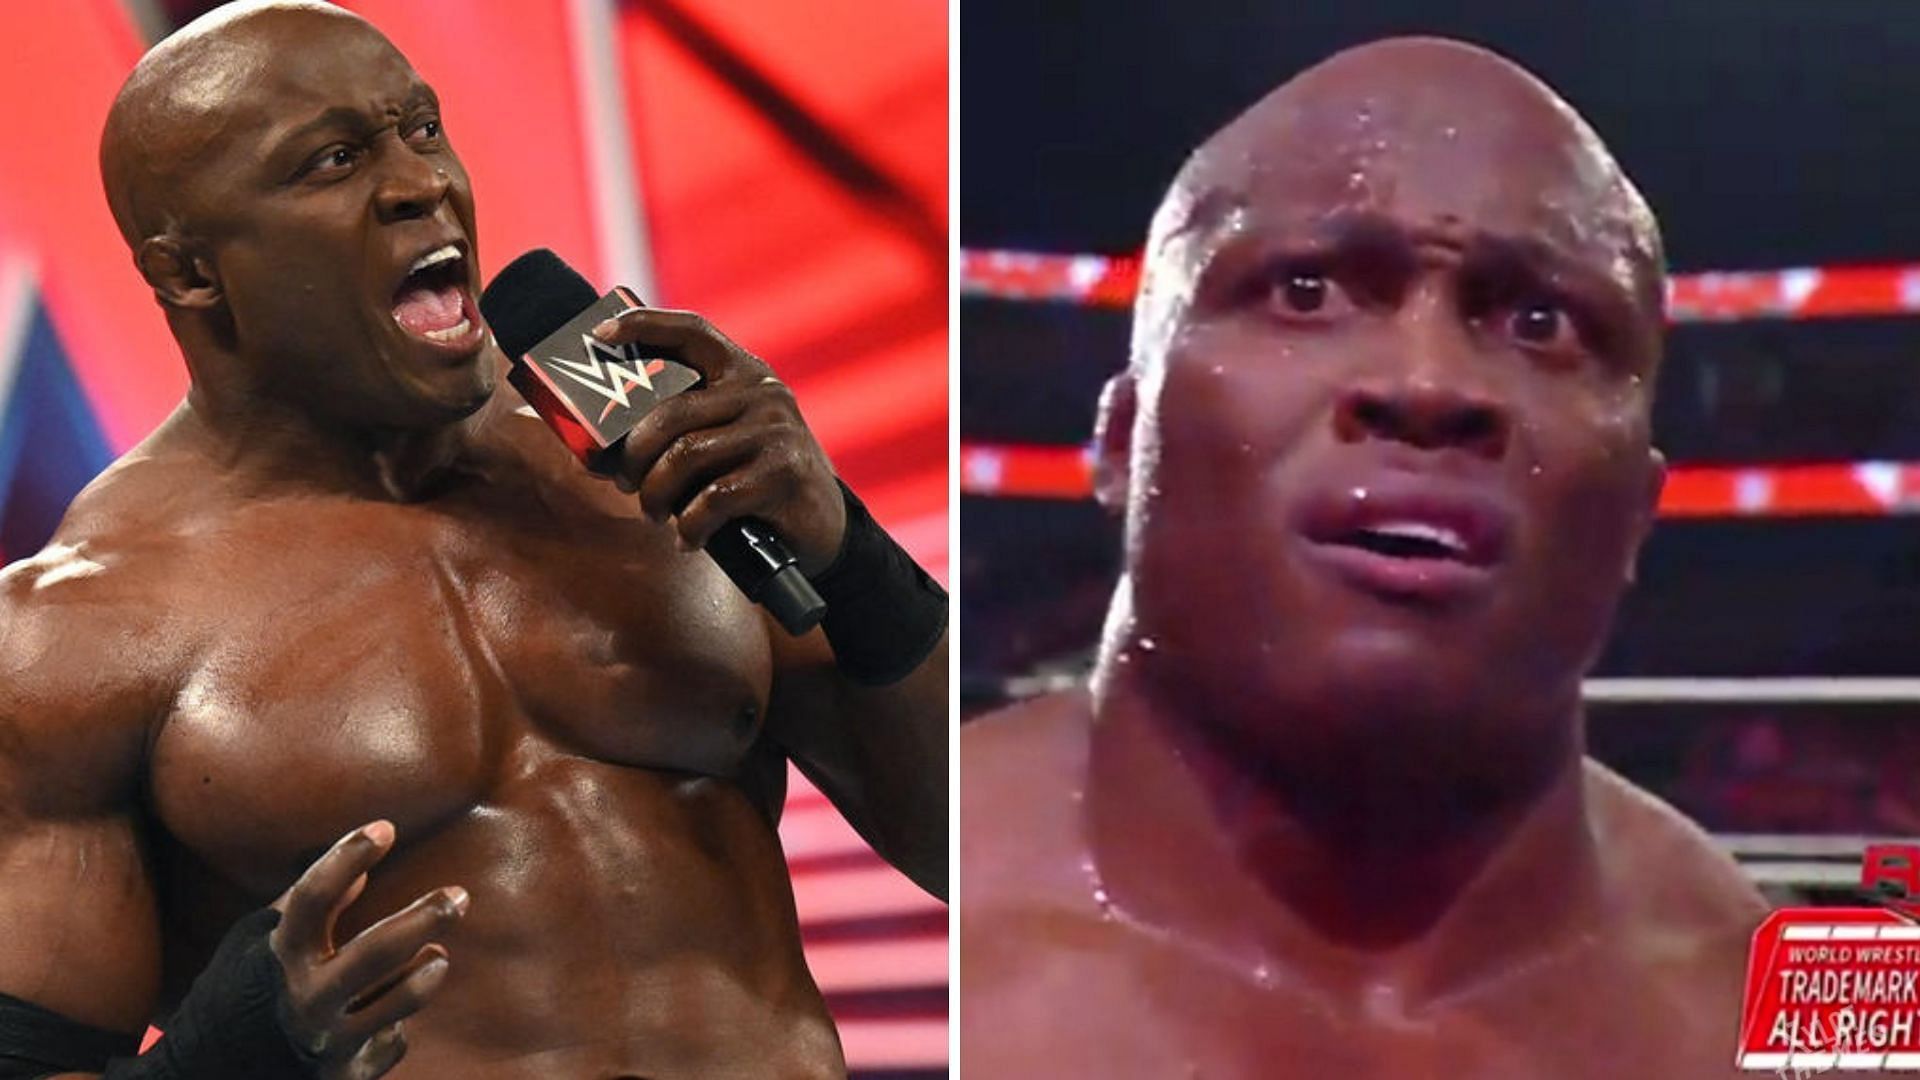 Bobby Lashley was fired from WWE at the end of RAW